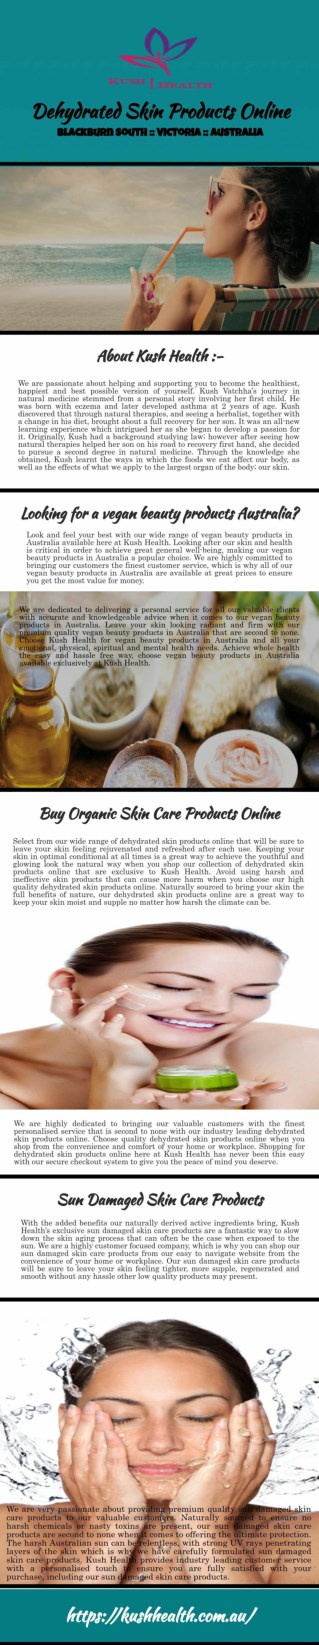 Affordable Dehydrated Skin Products Online